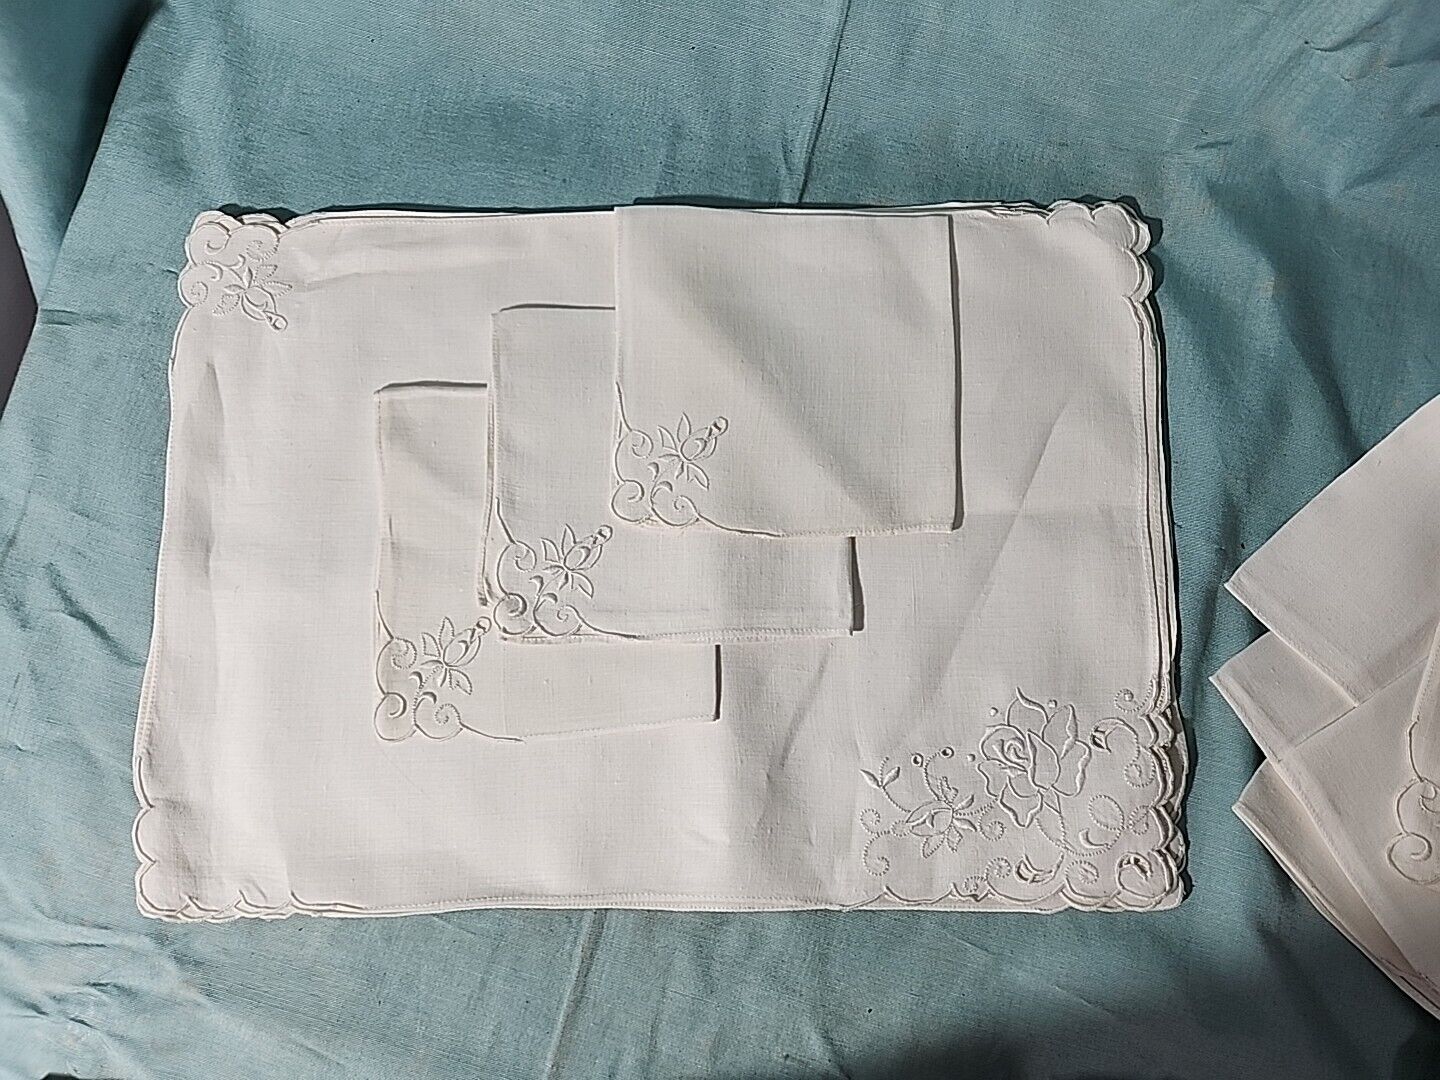 Vintage White Linen Madeira Placemats & Napkins Floral Embroidery Quality 16 Pcs